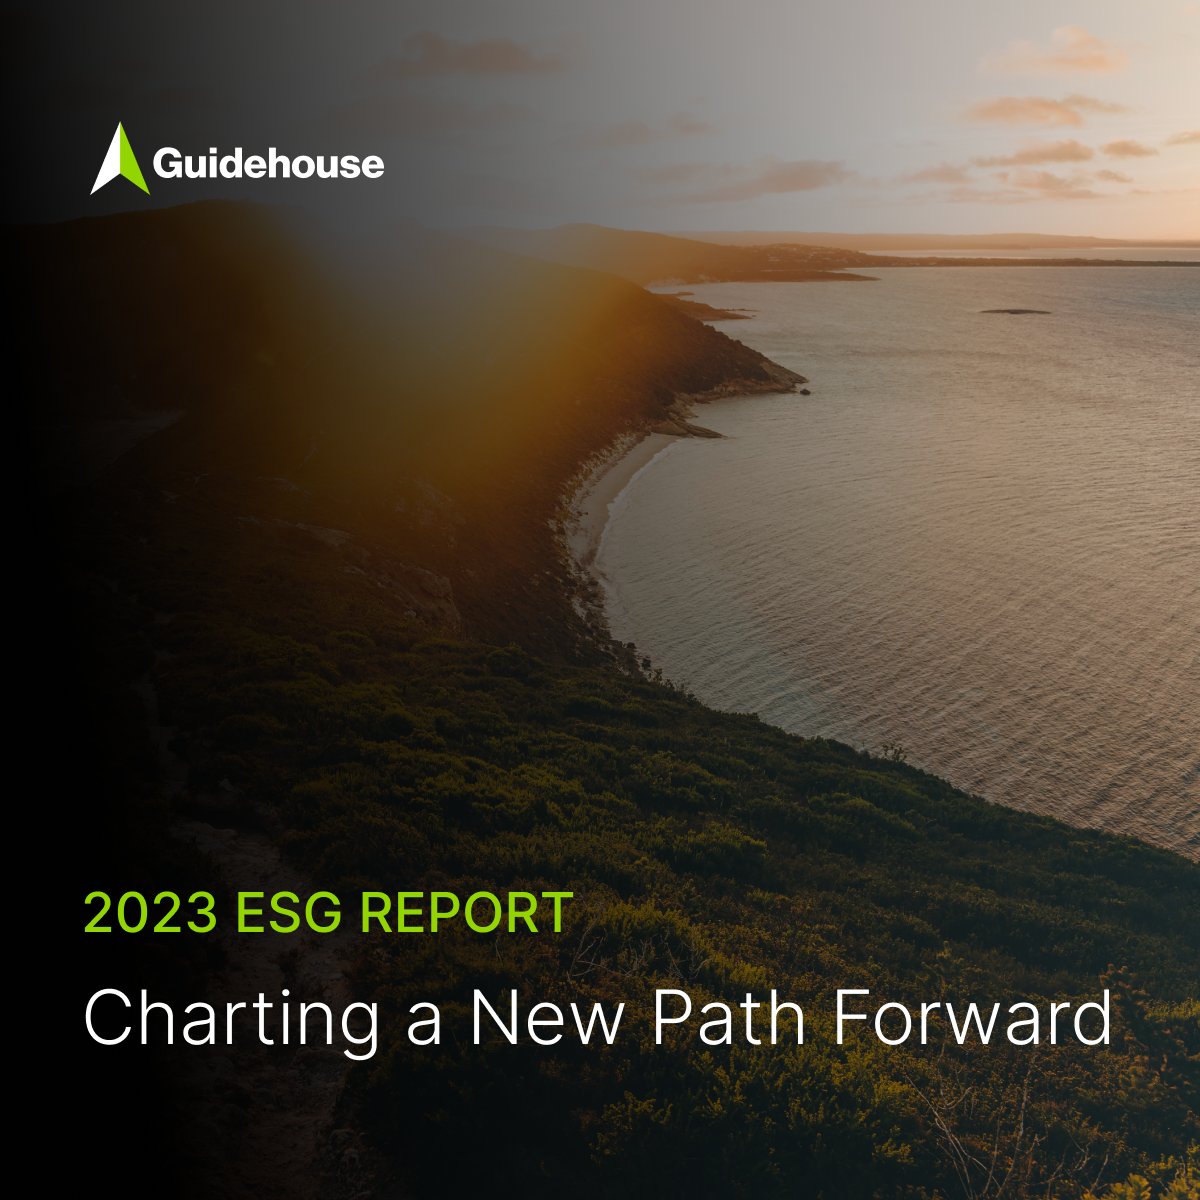 Discover how we’re charting a new path forward, one that is accompanied by and intended to serve our stakeholder community around the world. Download Guidehouse’s 2023 ESG Report: guidehou.se/4cZEuF9 #ESG #ESGreport #EarthMonth